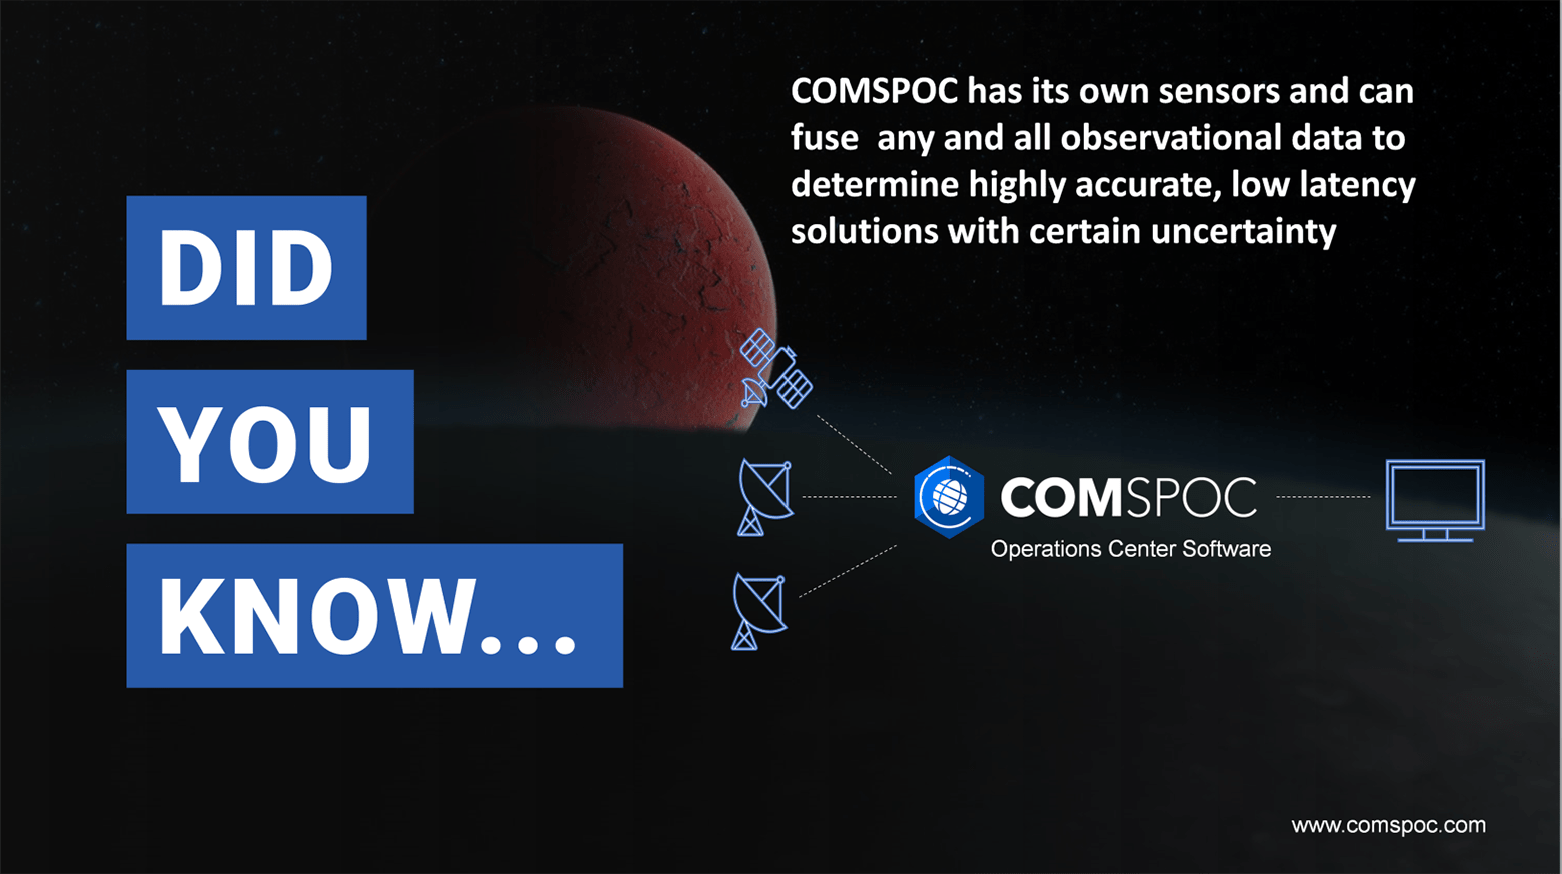 Did You Know: COMSPOC offers more than just software.